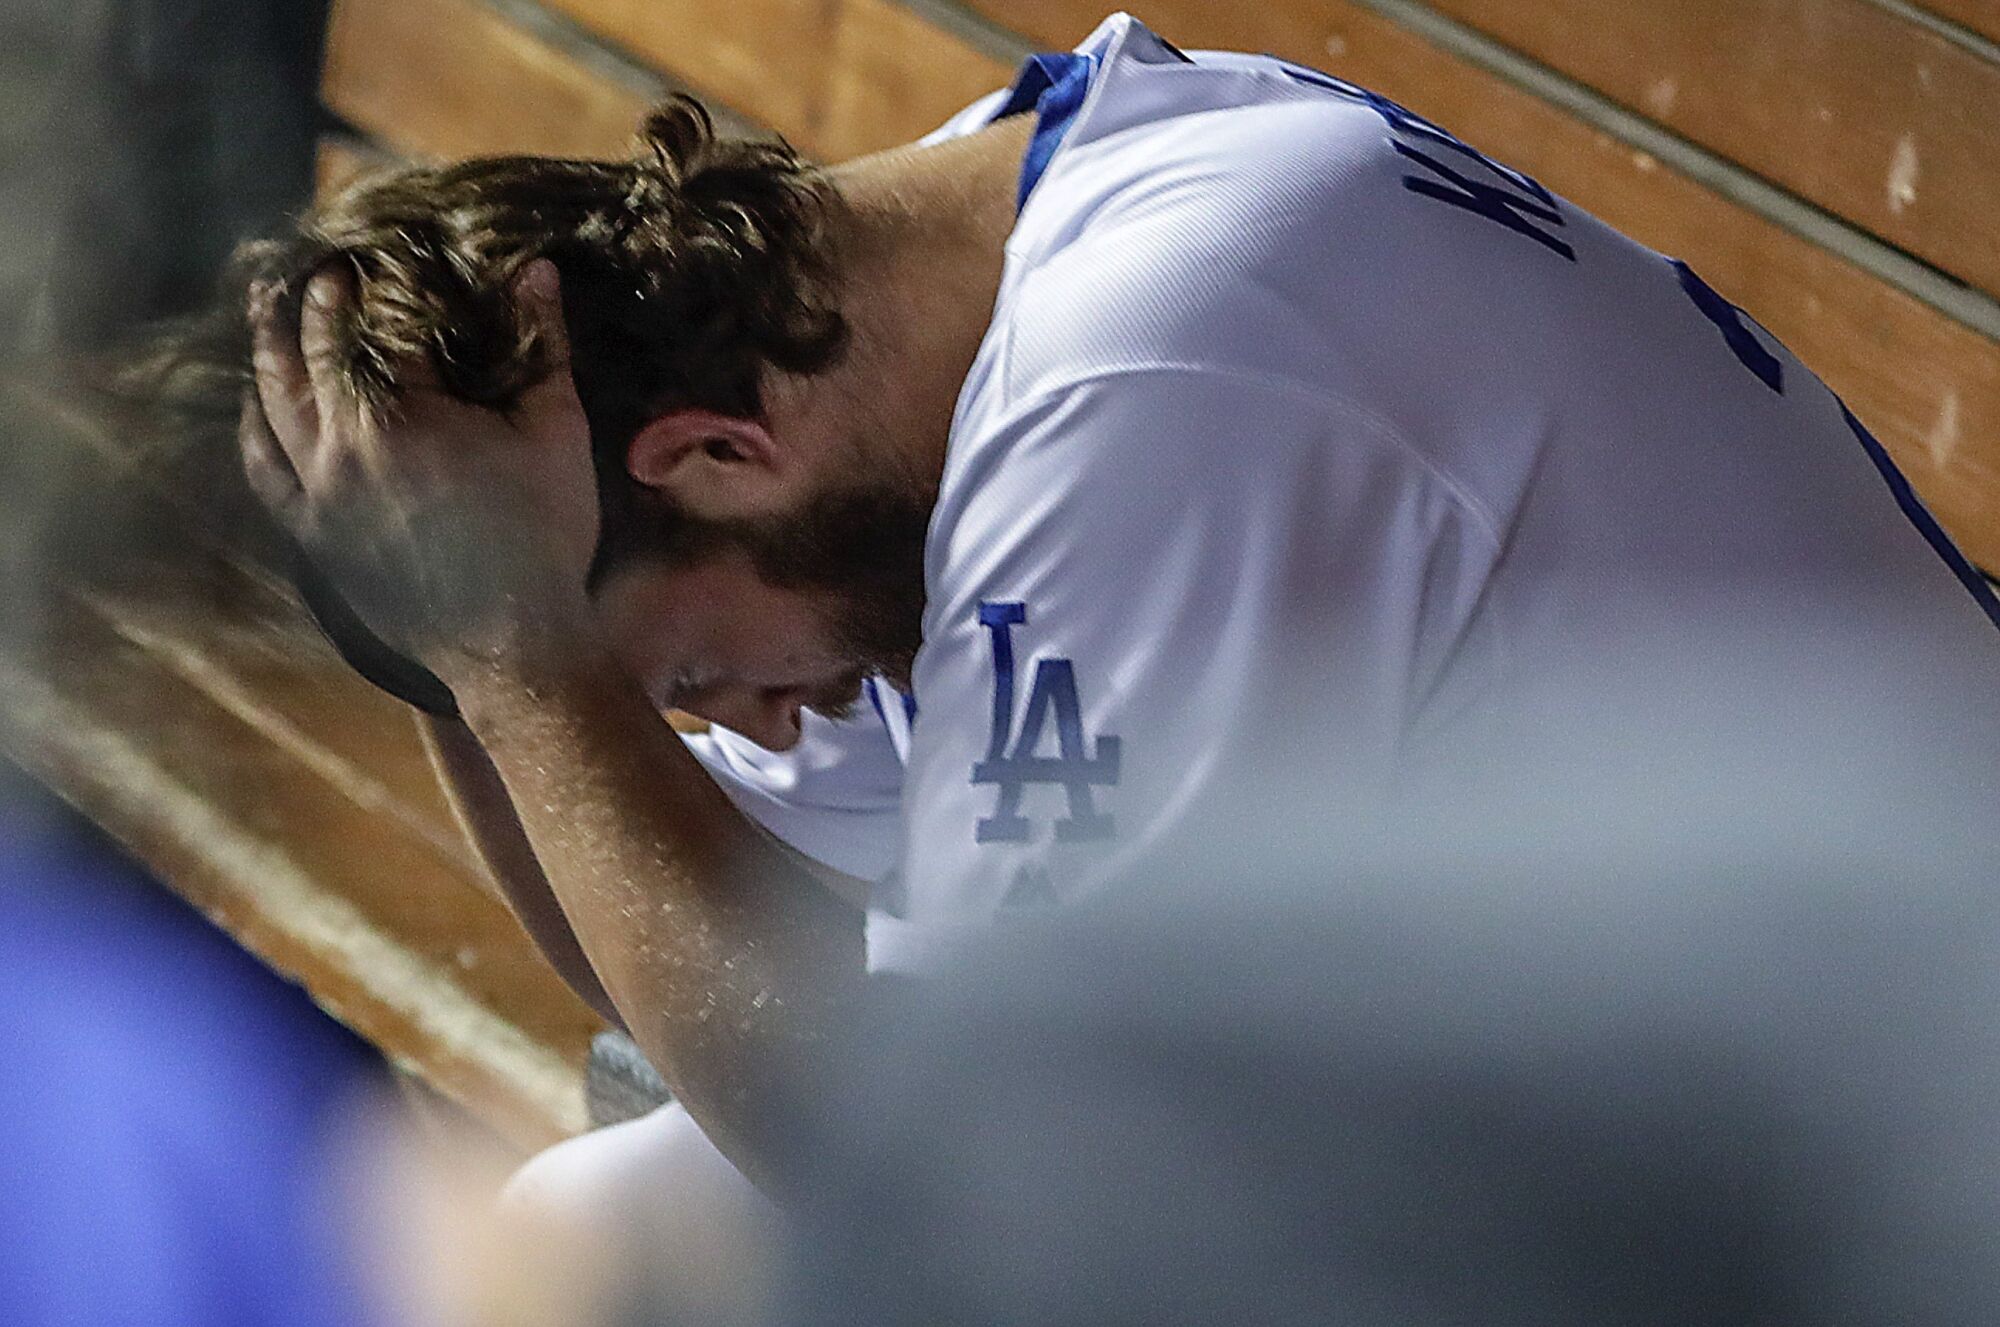 Dodgers pitcher Clayton Kershaw sits in the dugout during the team's loss to the Washington Nationals in the 2019 NLDS.